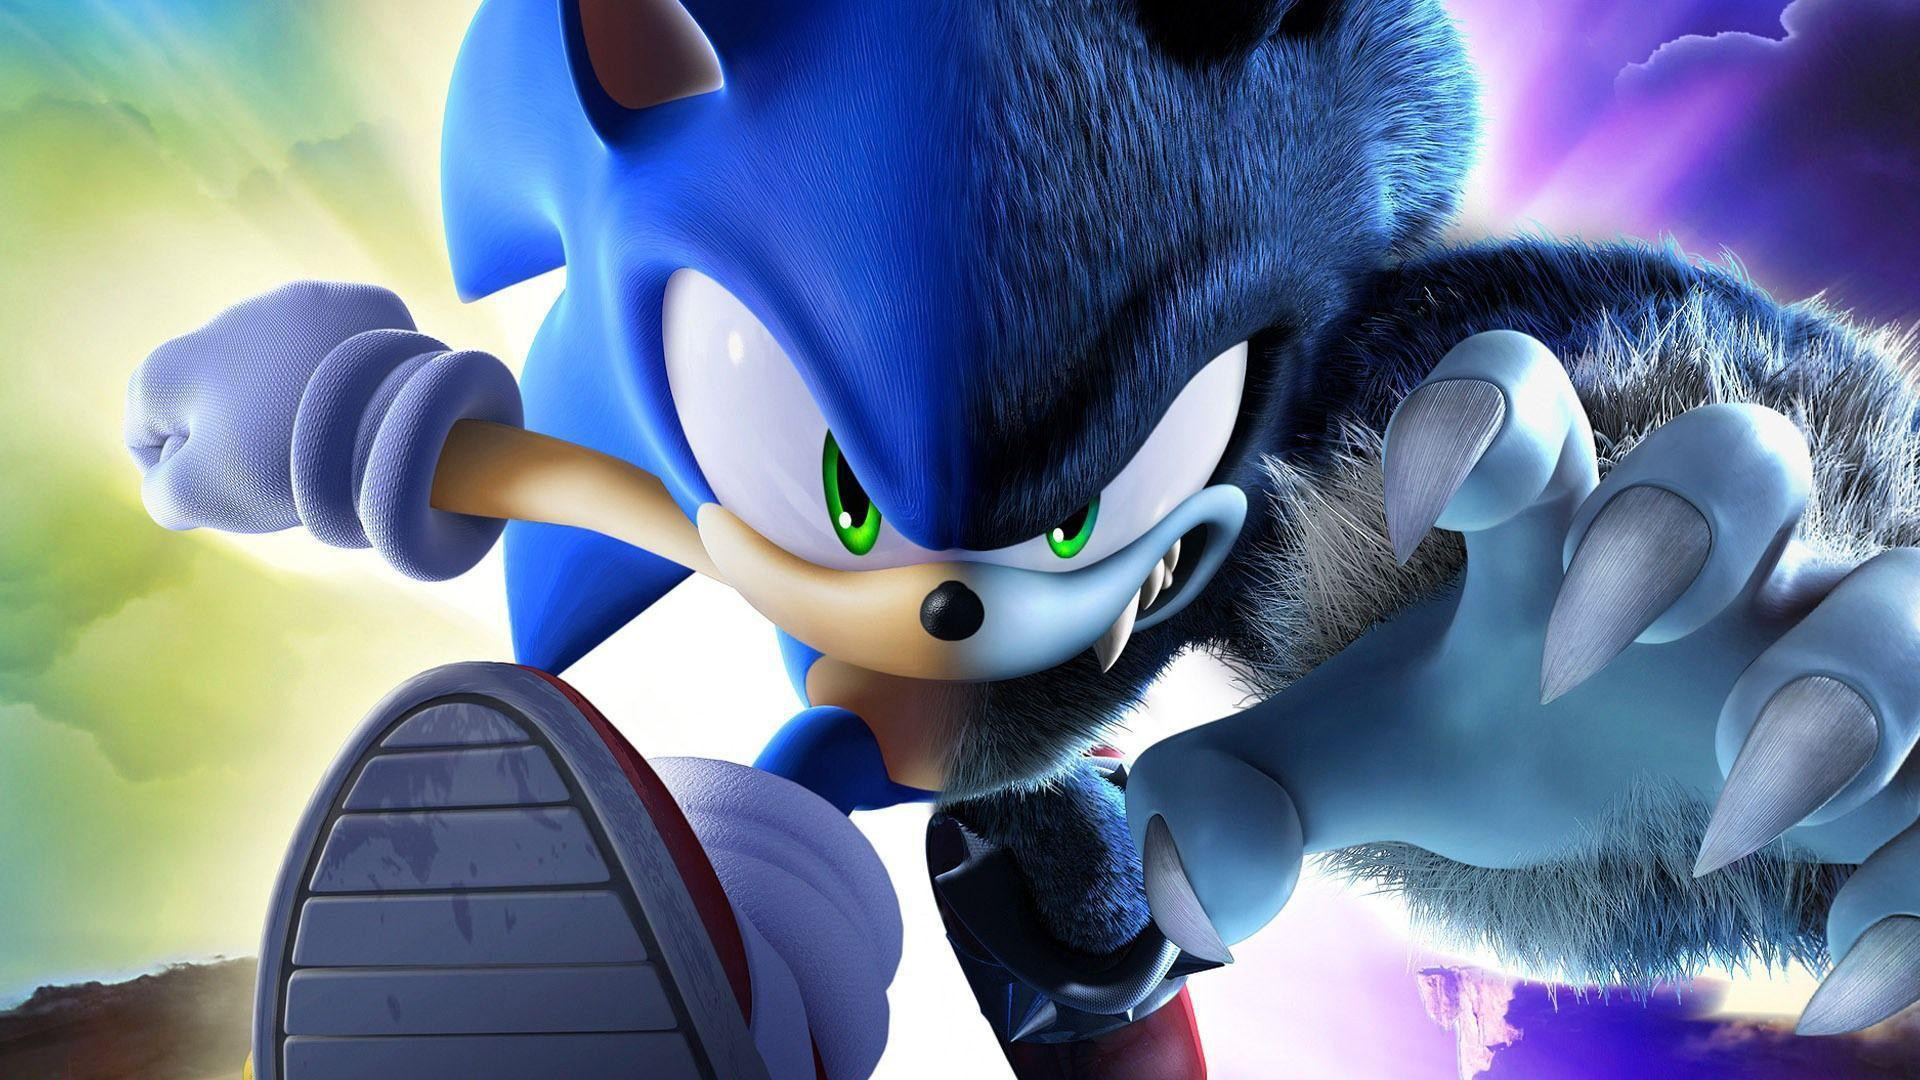 Angry Face Of Sonic The Hedgehog With Big Nails 2K Sonic